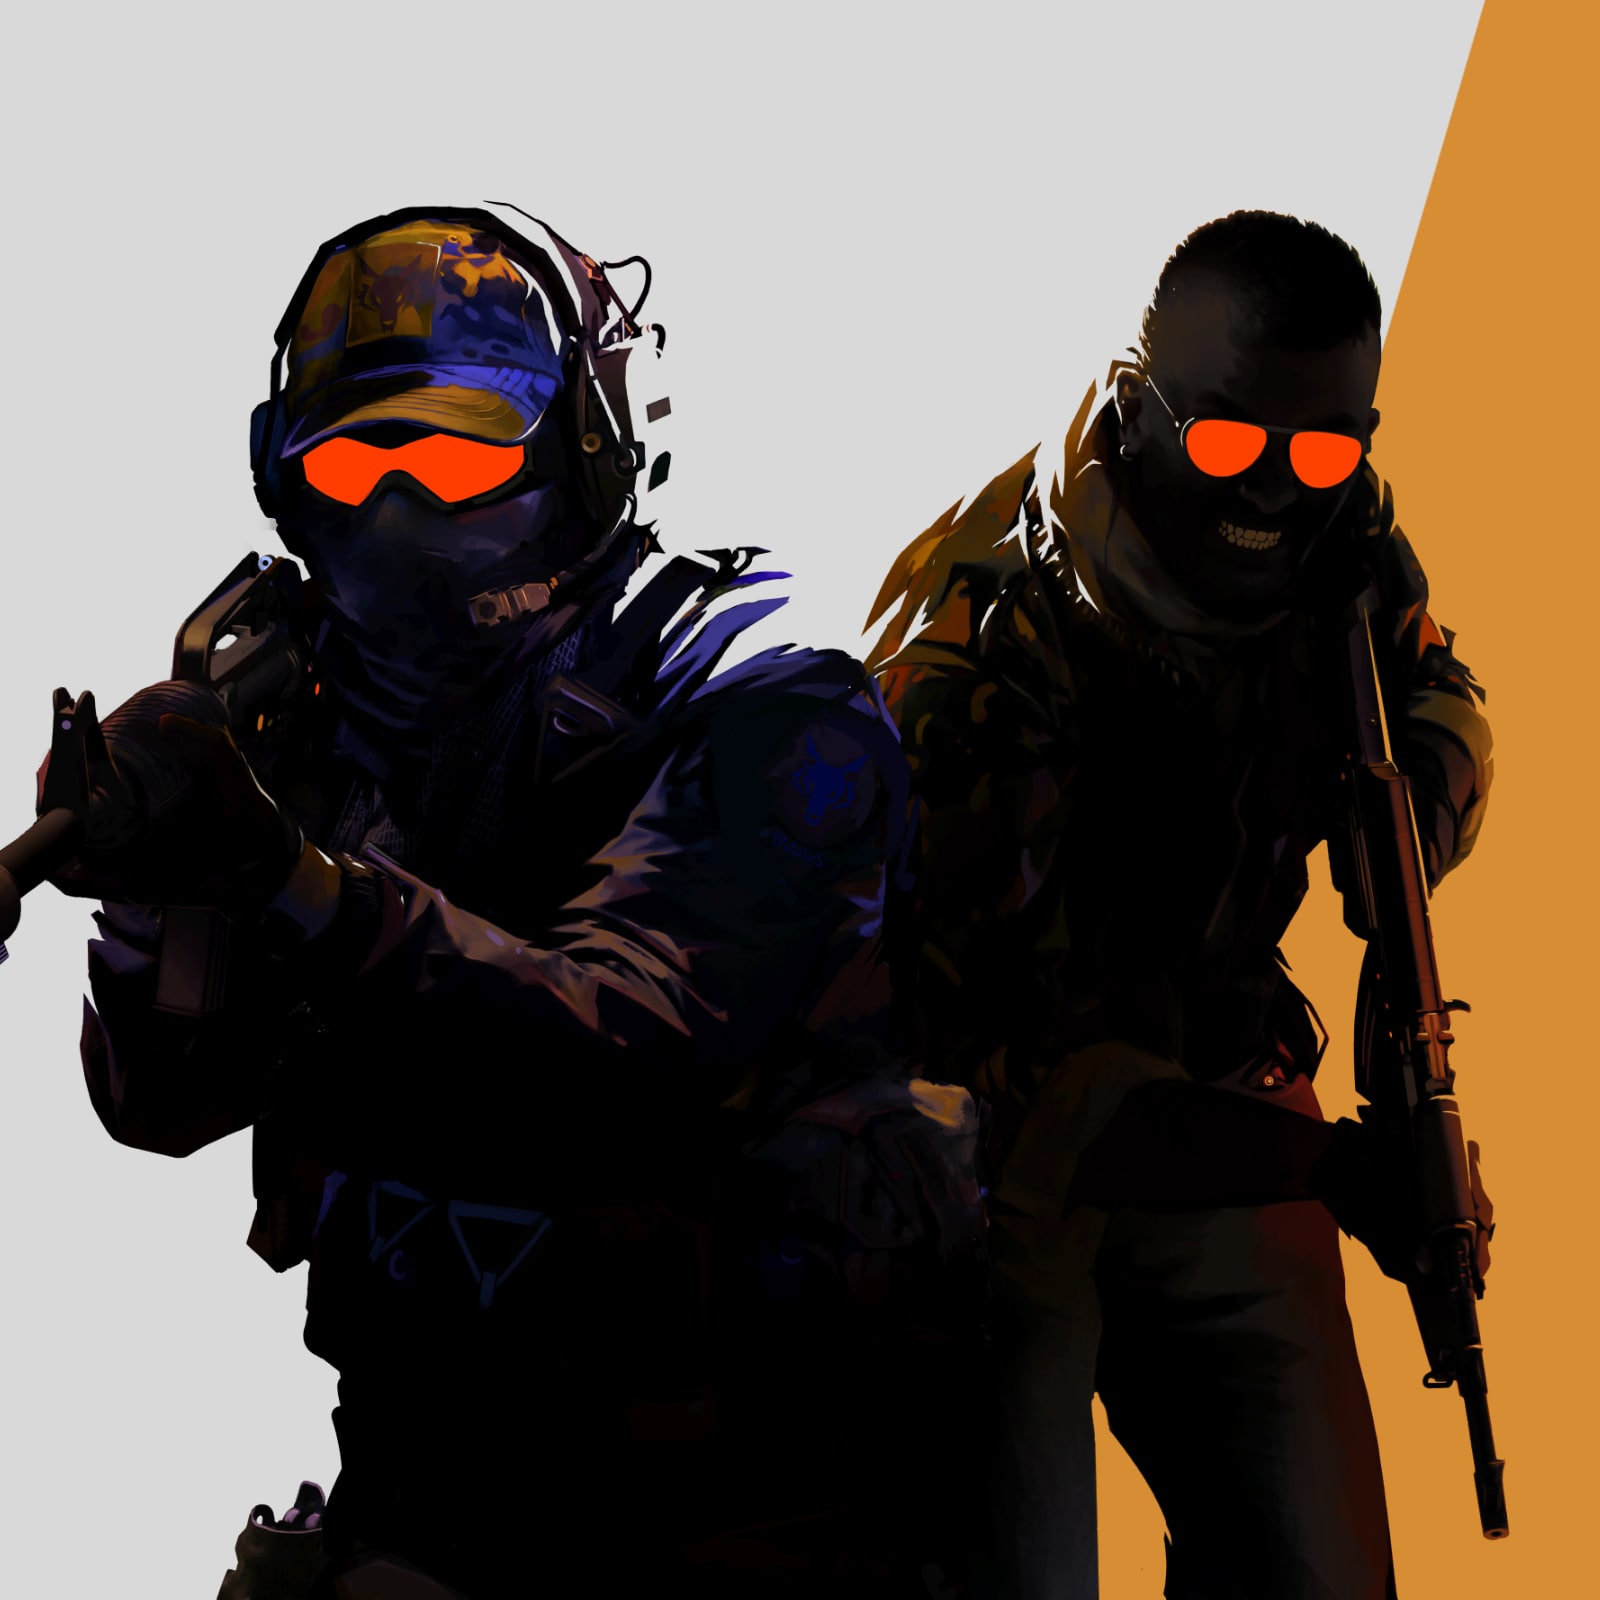 CSGO Mobile Wallpapers Pack : r/GlobalOffensive